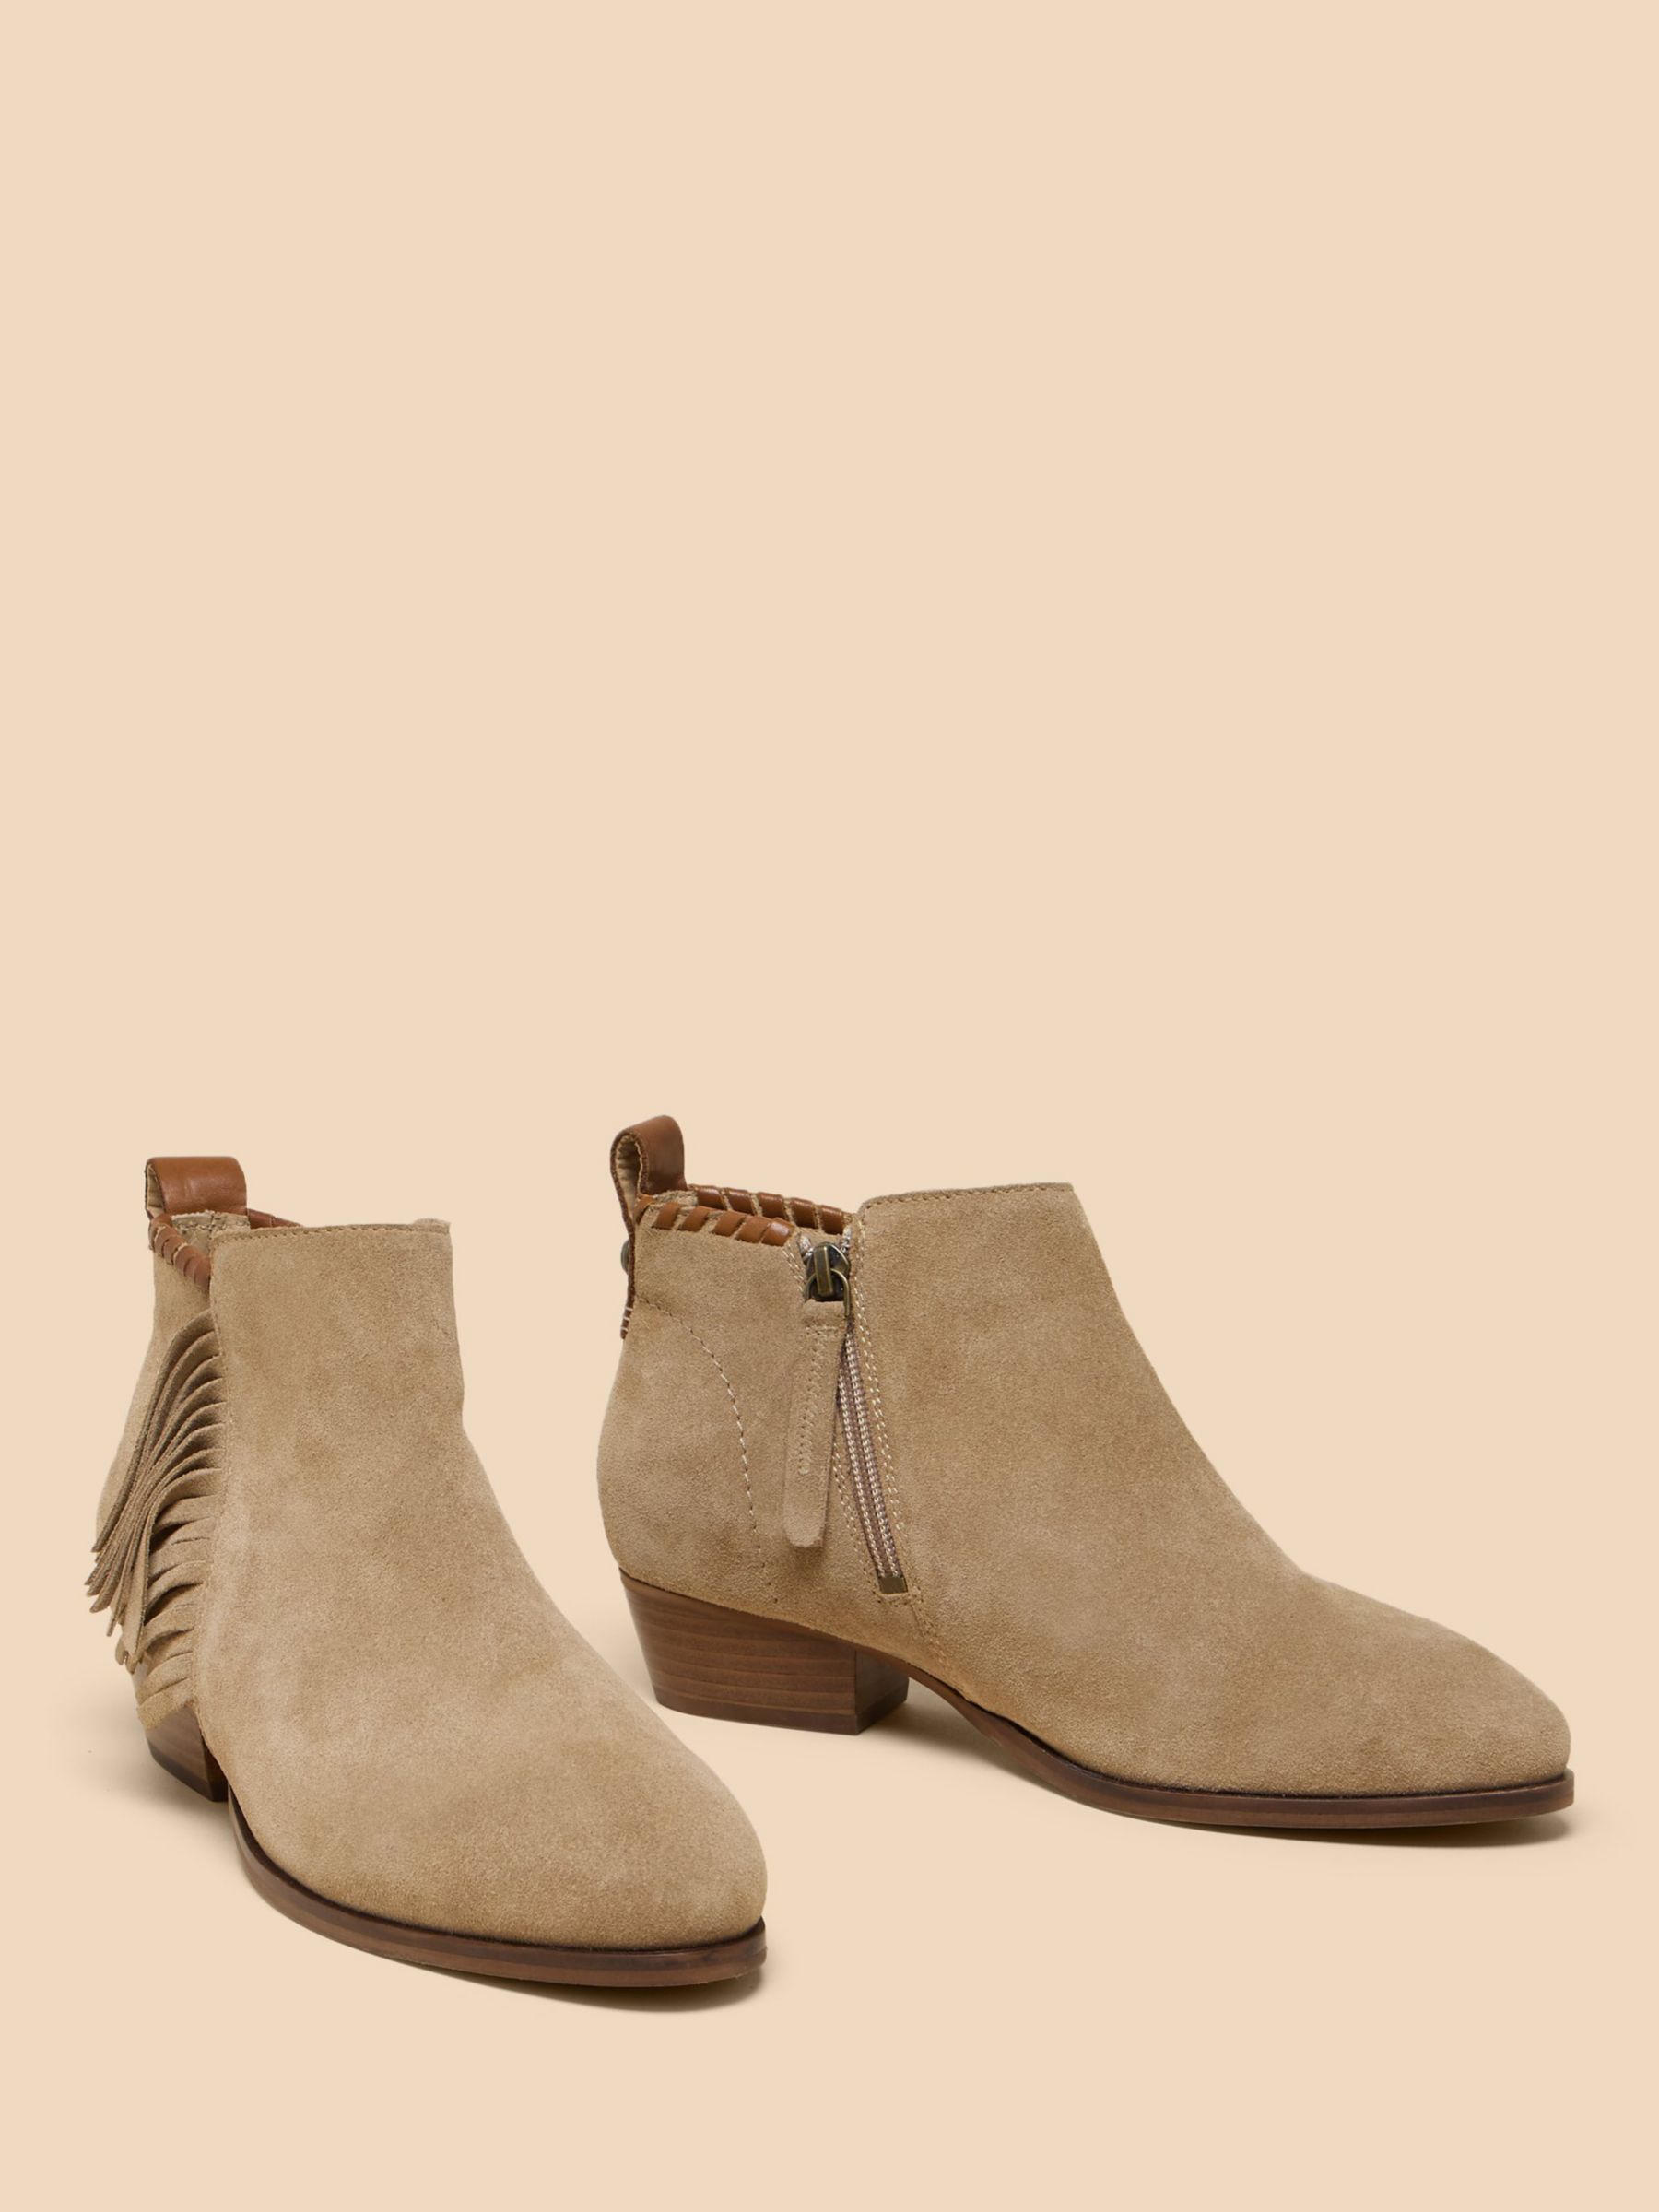 White Stuff  Acacia Suede Fringe Ankle Boots, Light Natural, 3